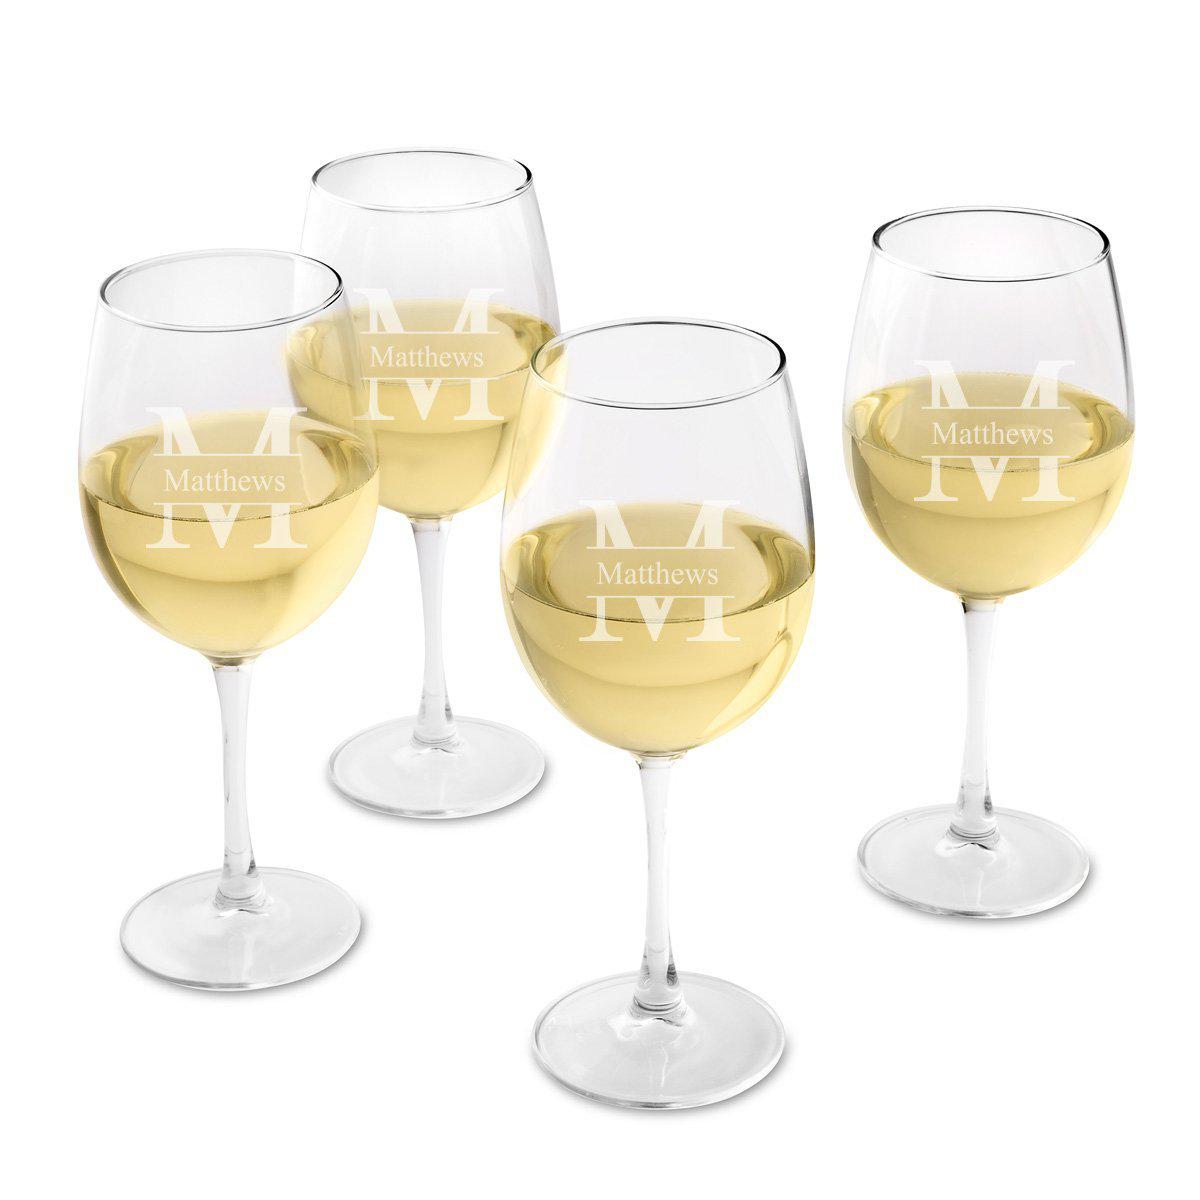 Personalized White Wine Glasses Set of 4 - All